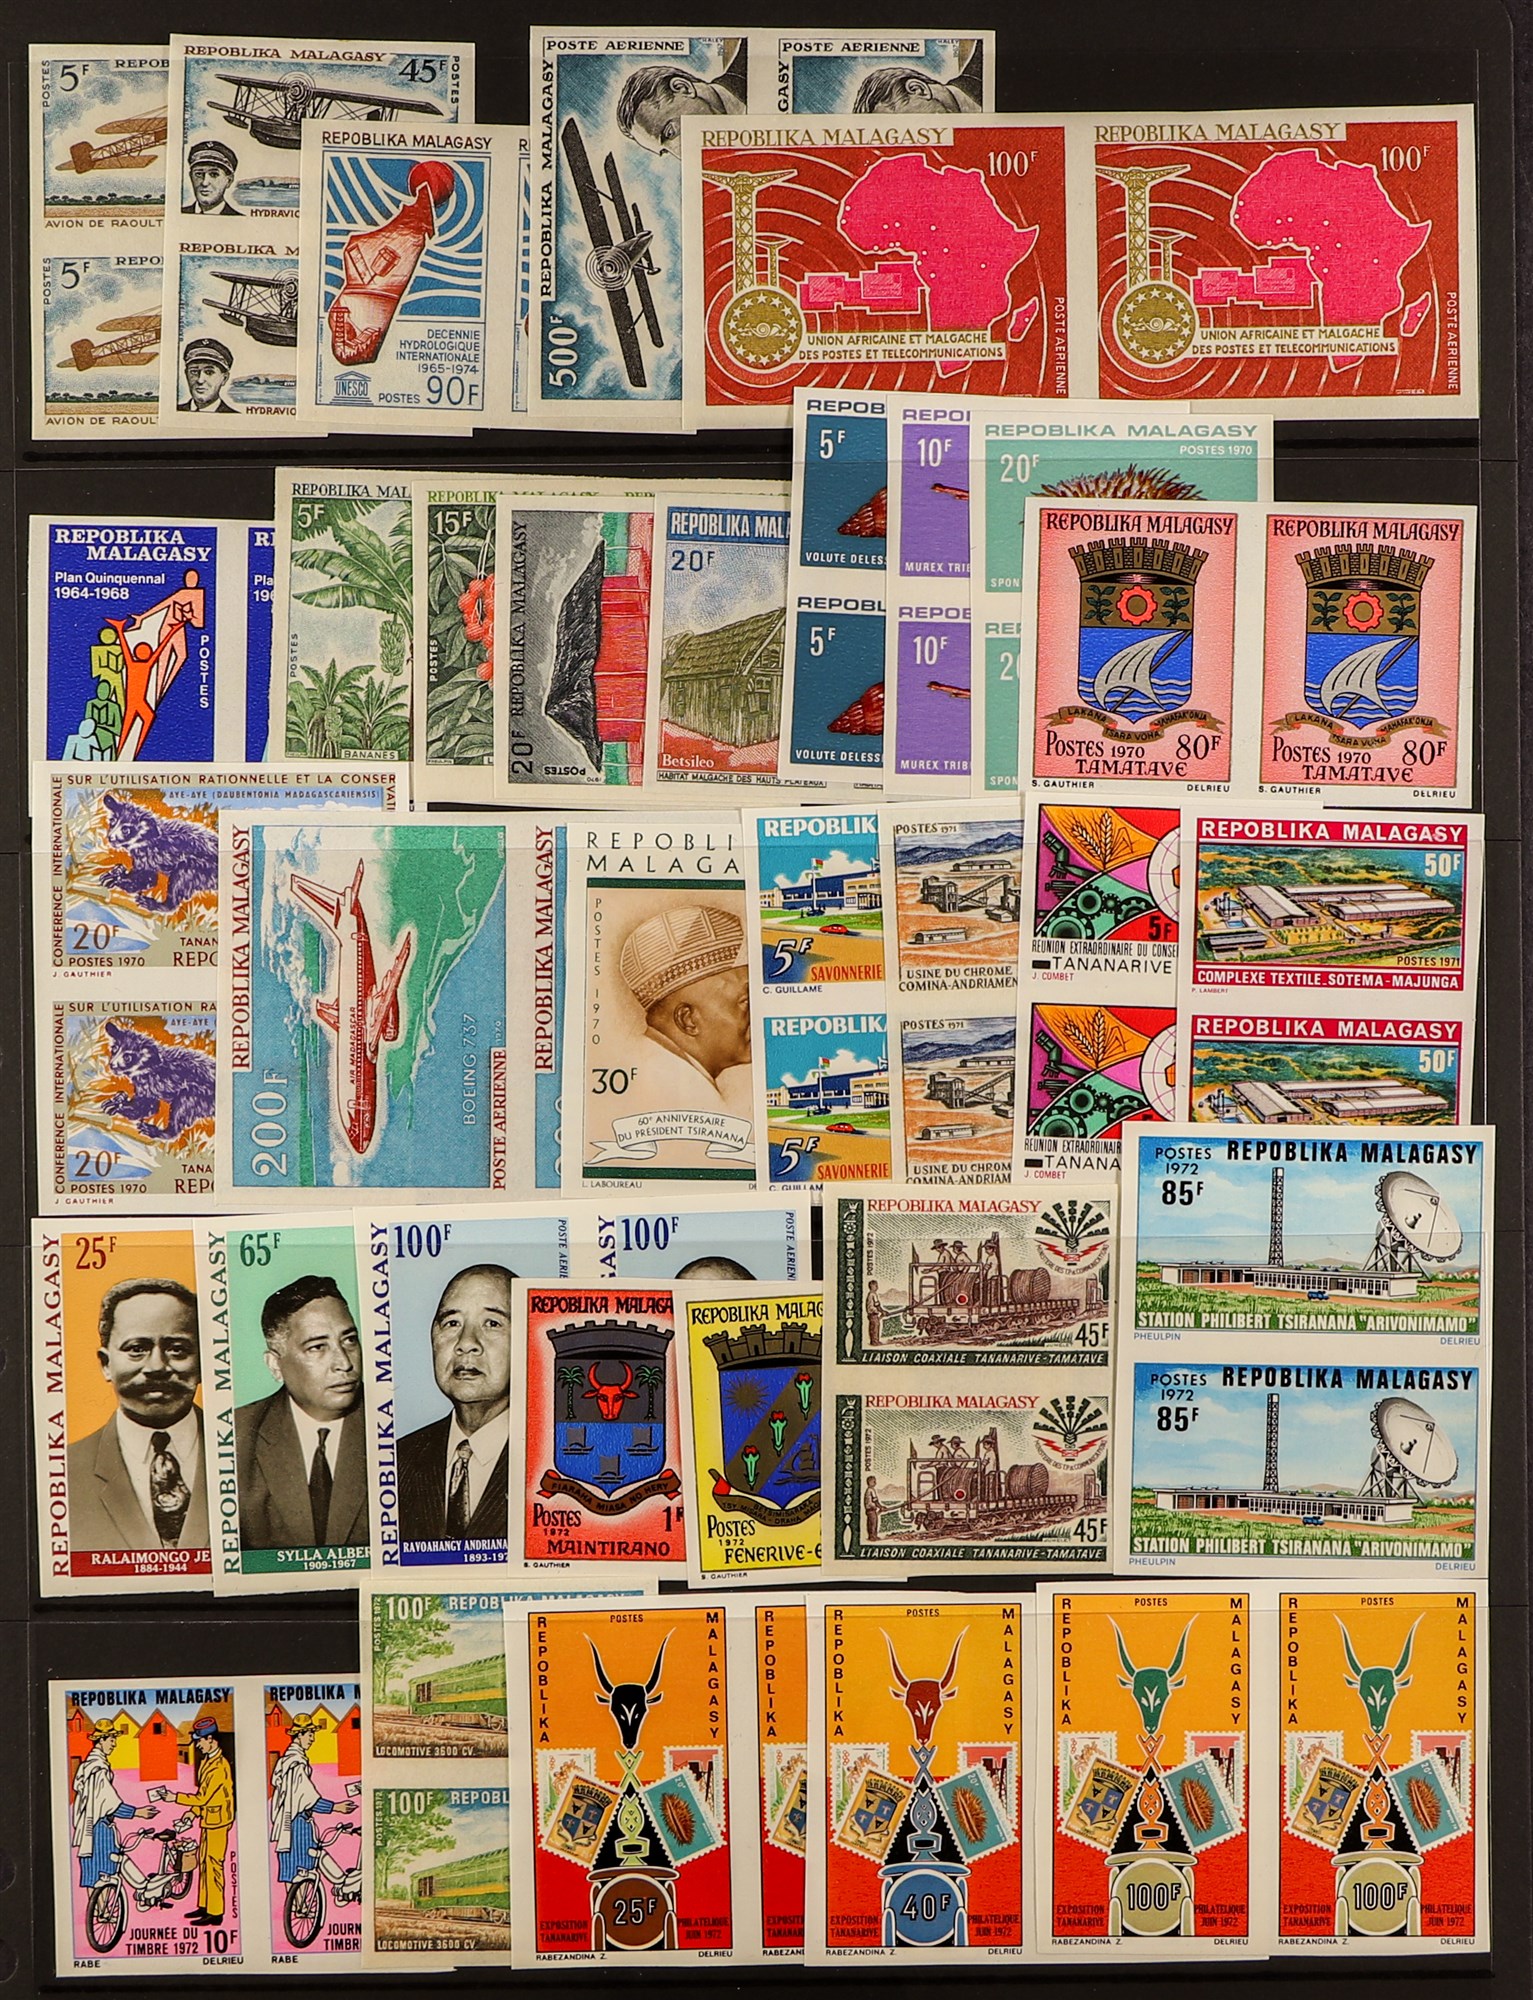 MADAGASCAR 1967-73 IMPERF PAIRS Malagasy Republic never hinged mint imperf pairs, Postage and Air